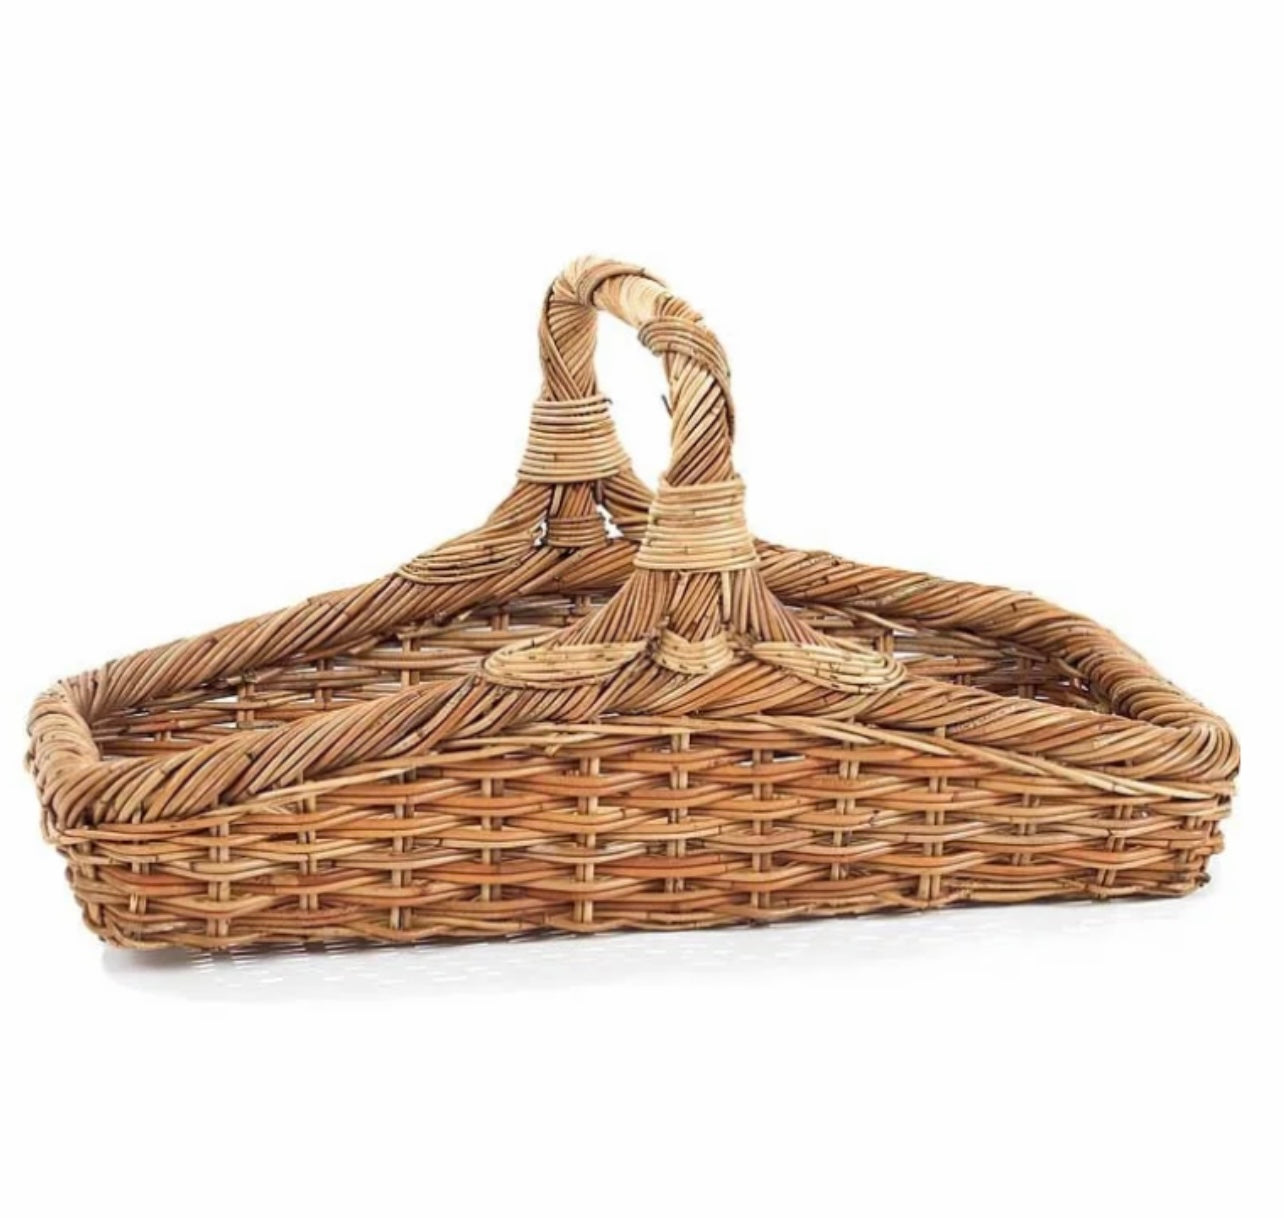 French Country Wildflower Basket